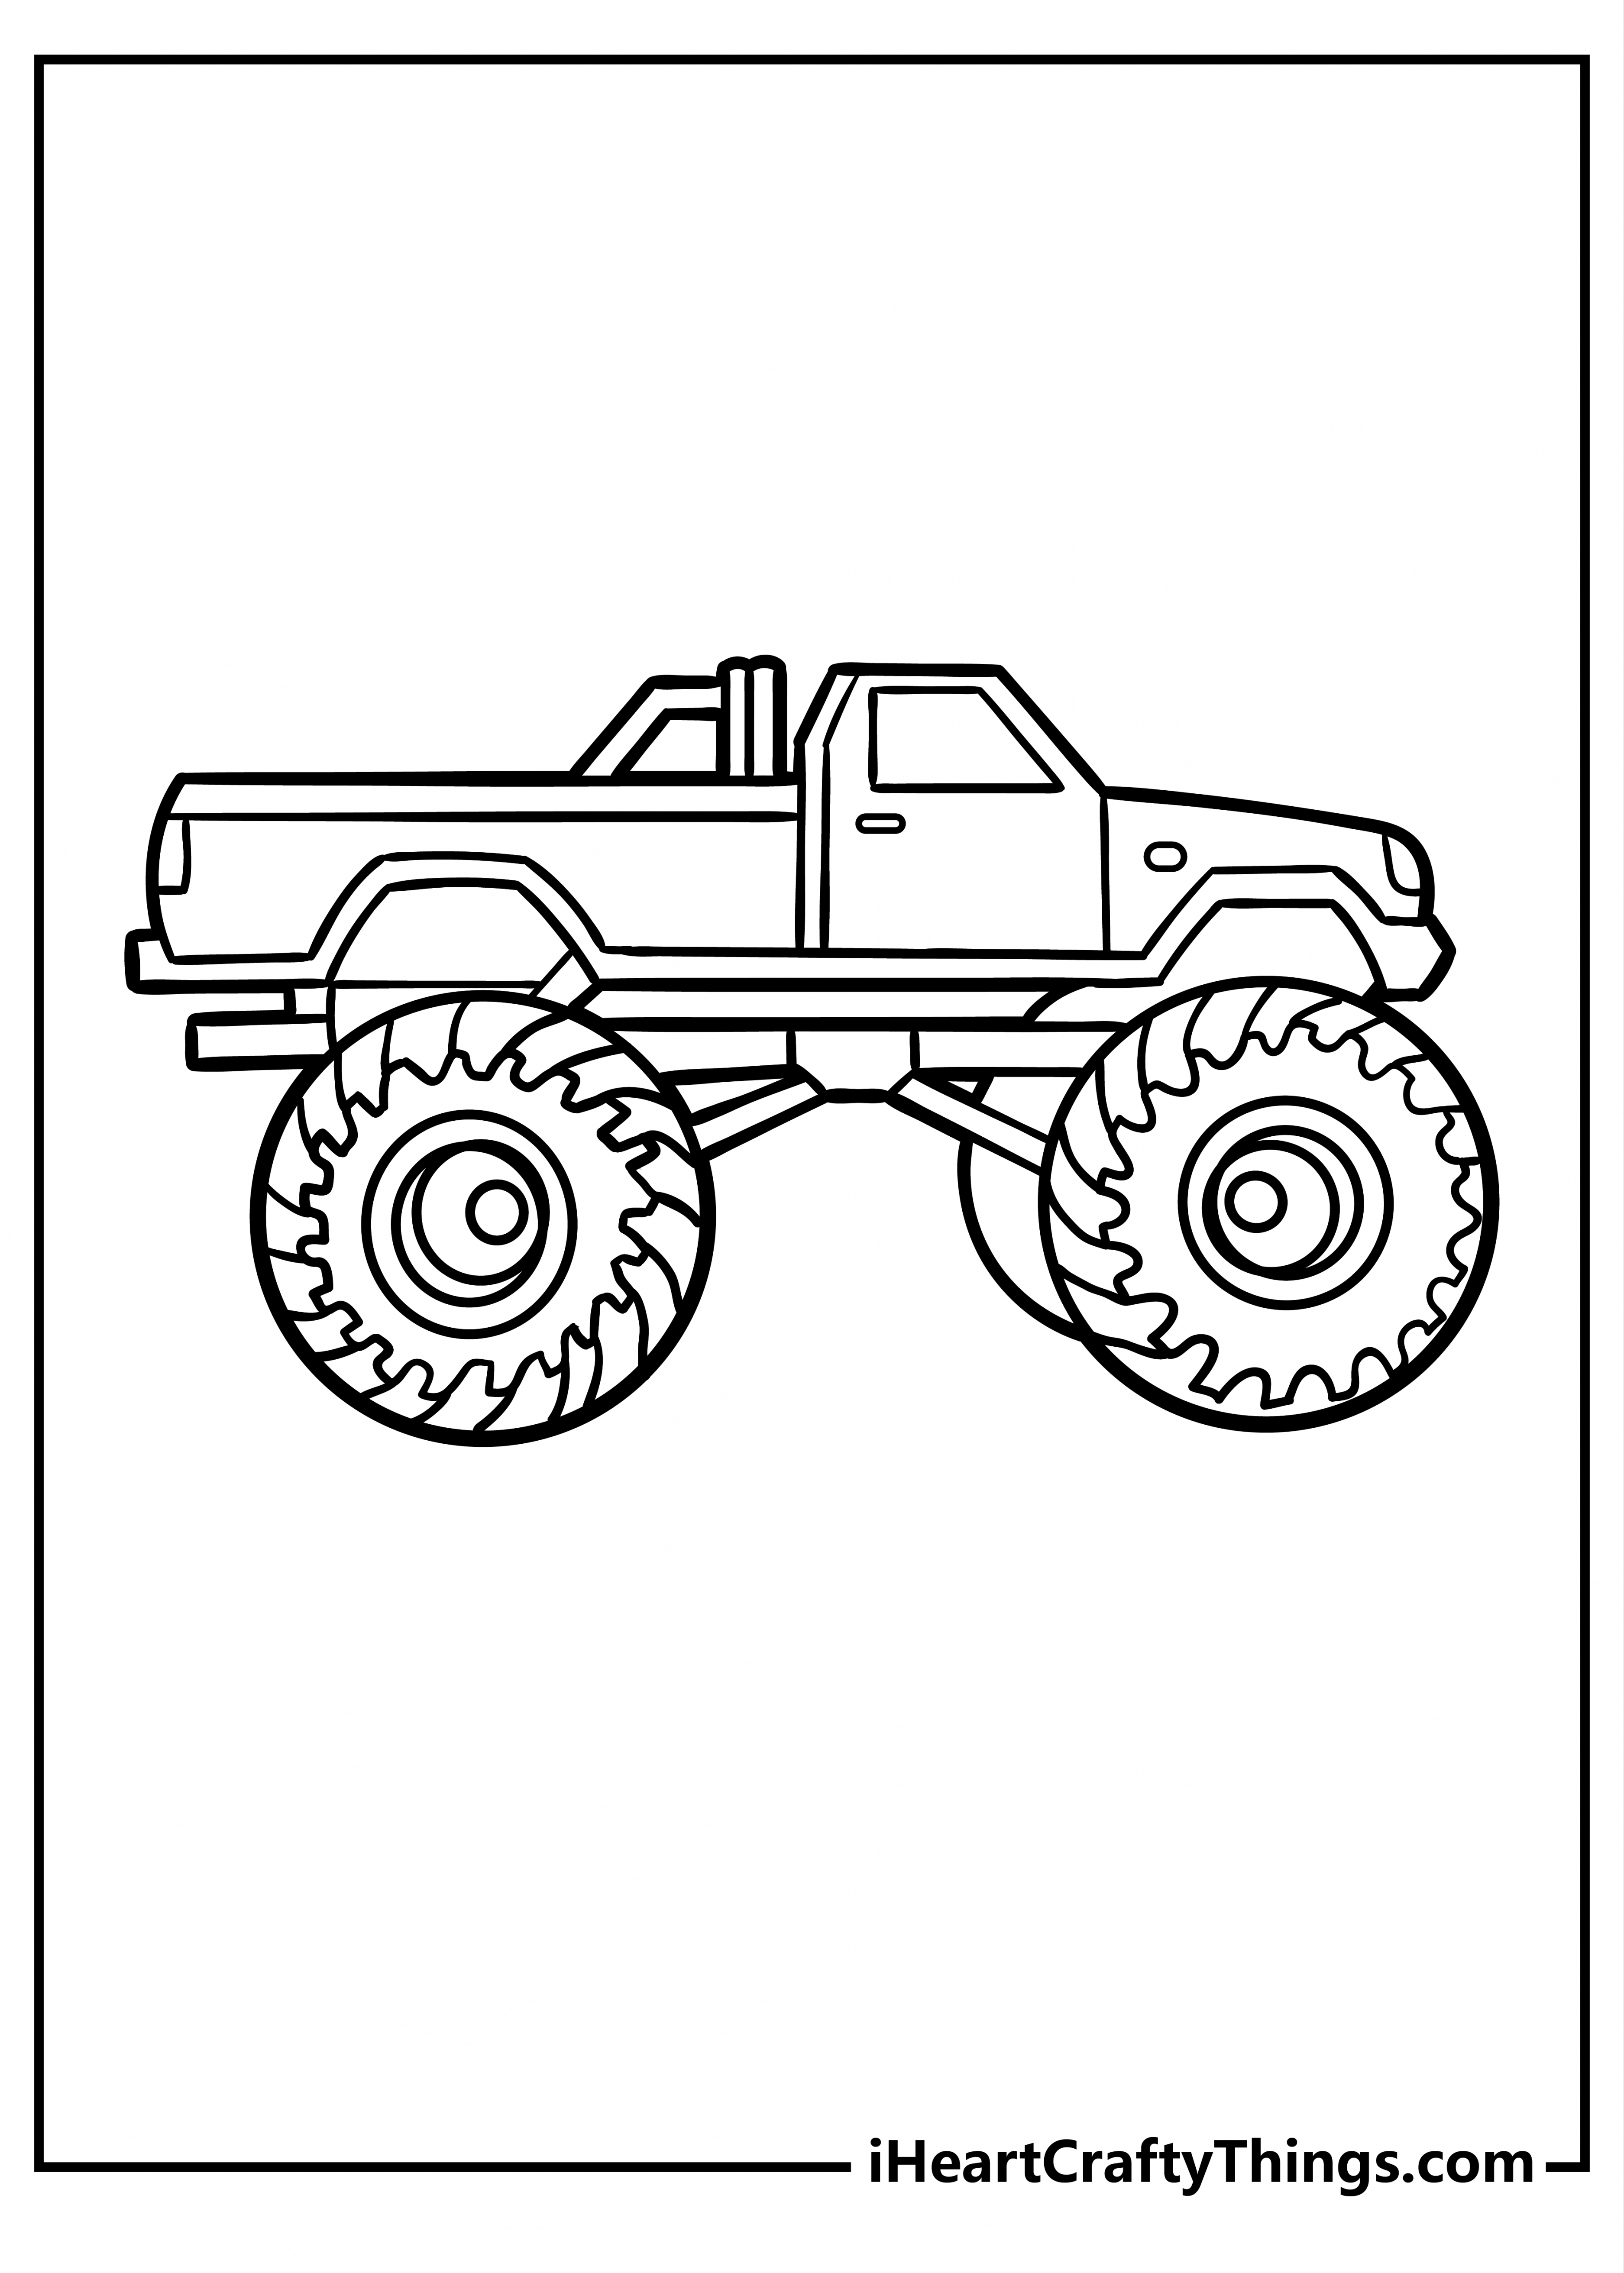 Printable Monster Truck Coloring Pages (Updated ) - FREE Printables - Monster Truck Coloring Pages Free Printable